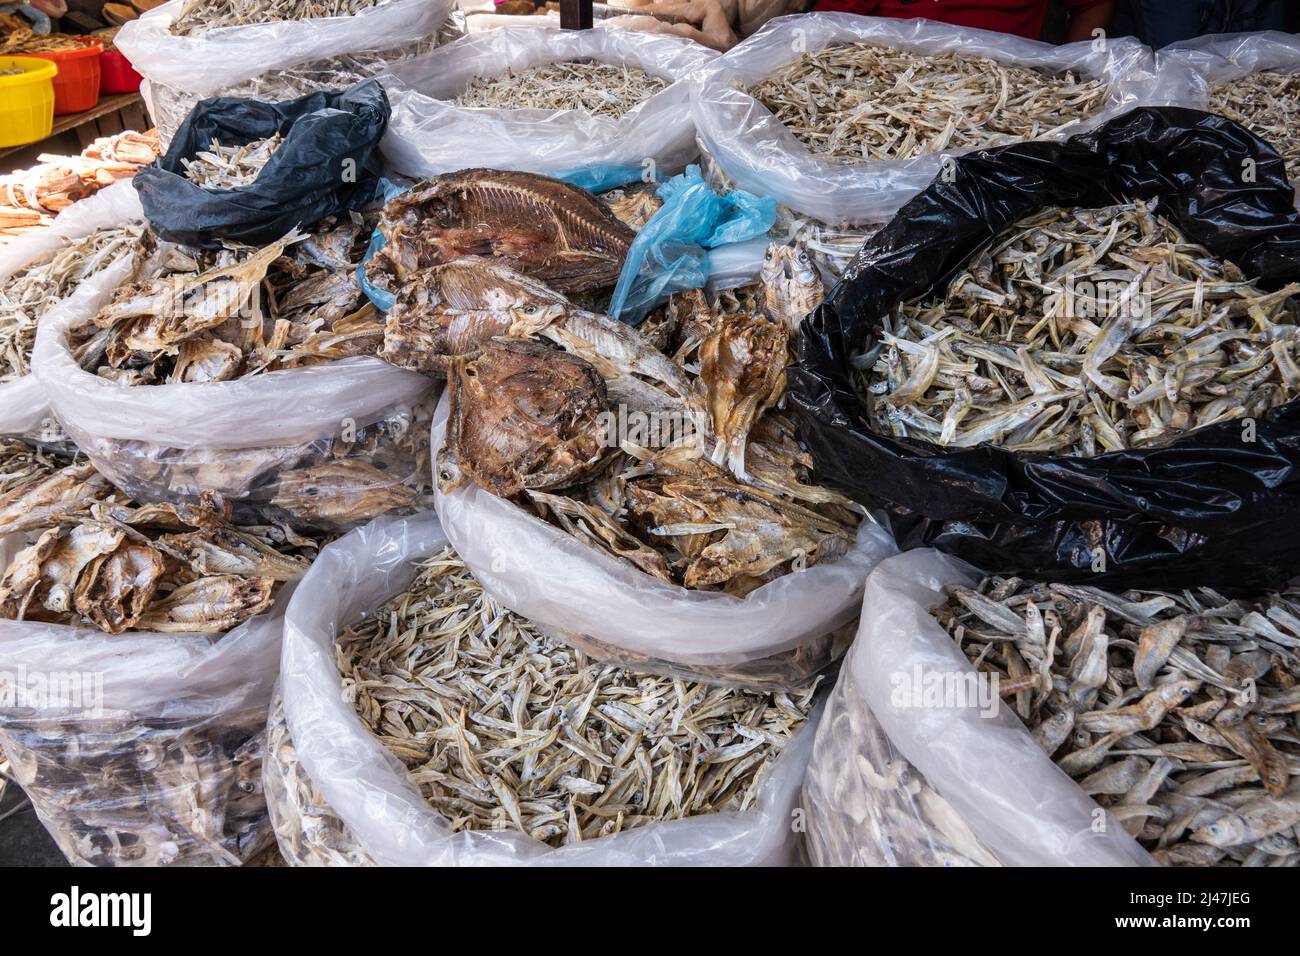 Dried and salted Charal, a minnow-size fish also called Lake Patzcuaro white fish, on sale at a market in Patzcuaro, Michoacan, Mexico. Stock Photo